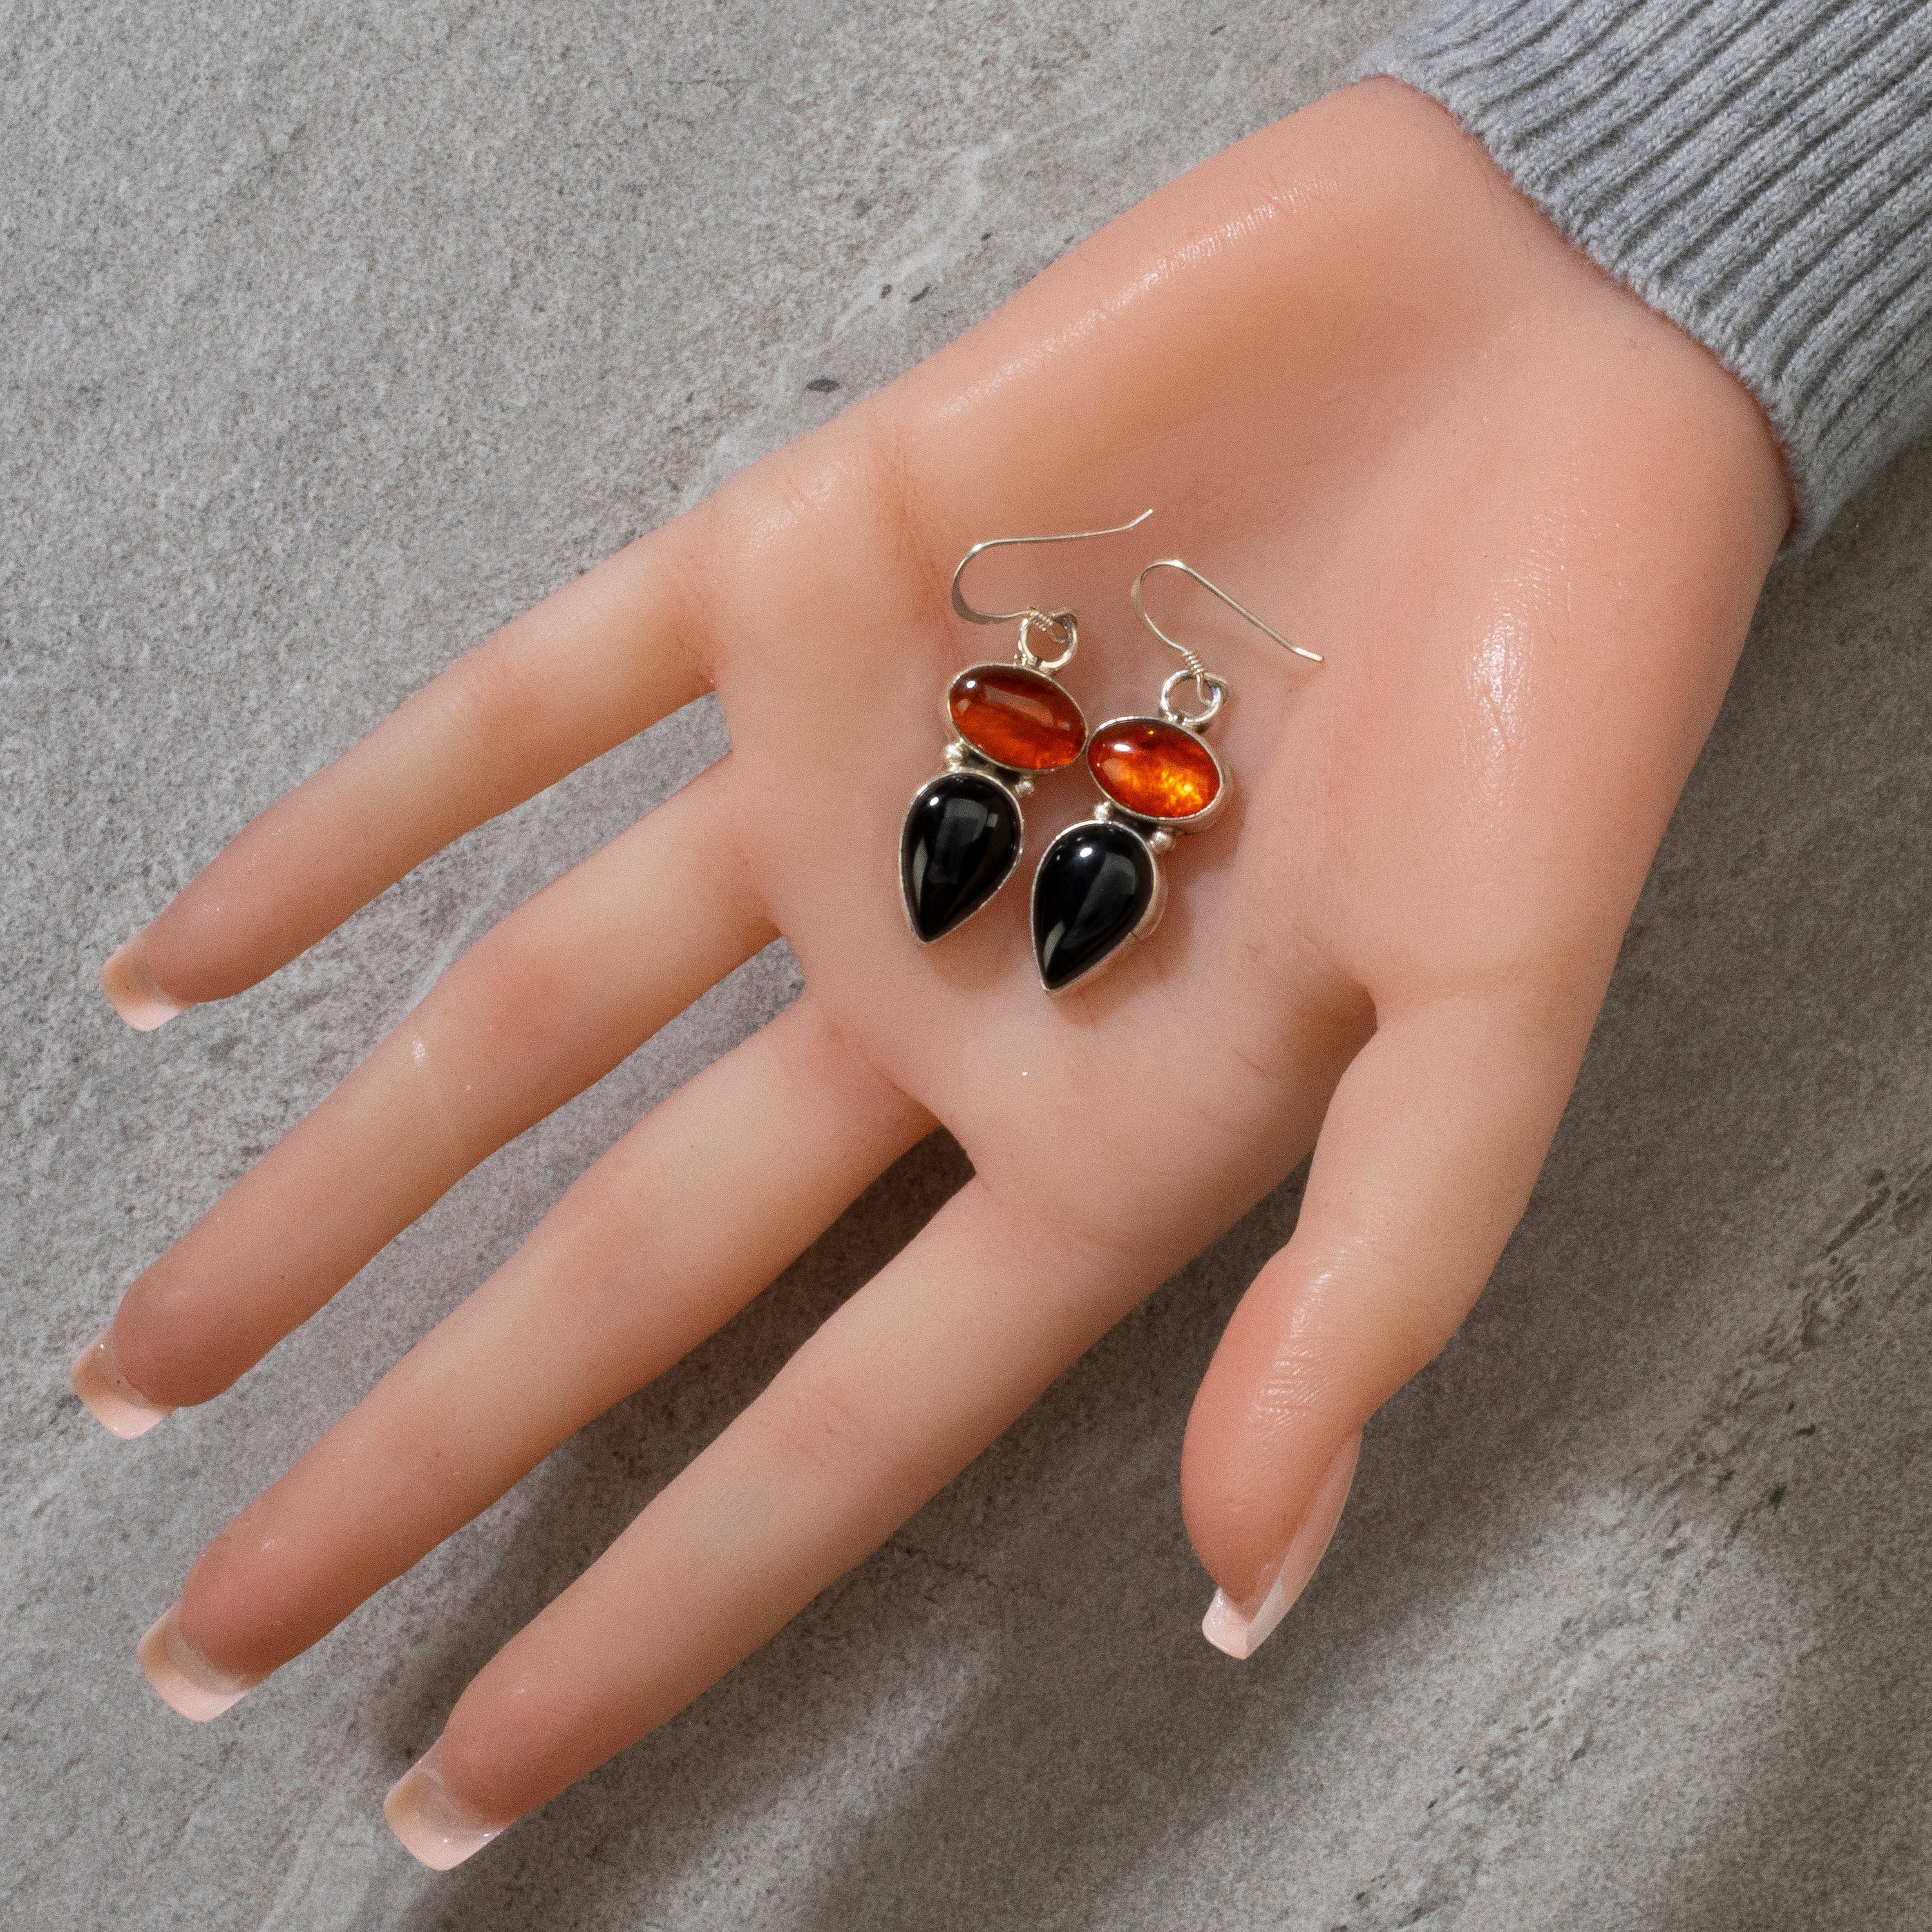 Kalifano Native American Jewelry Baltic Amber & Black Onyx Dangle Navajo USA Native American Made 925 Sterling Silver Earrings with French Hook NAE300.026